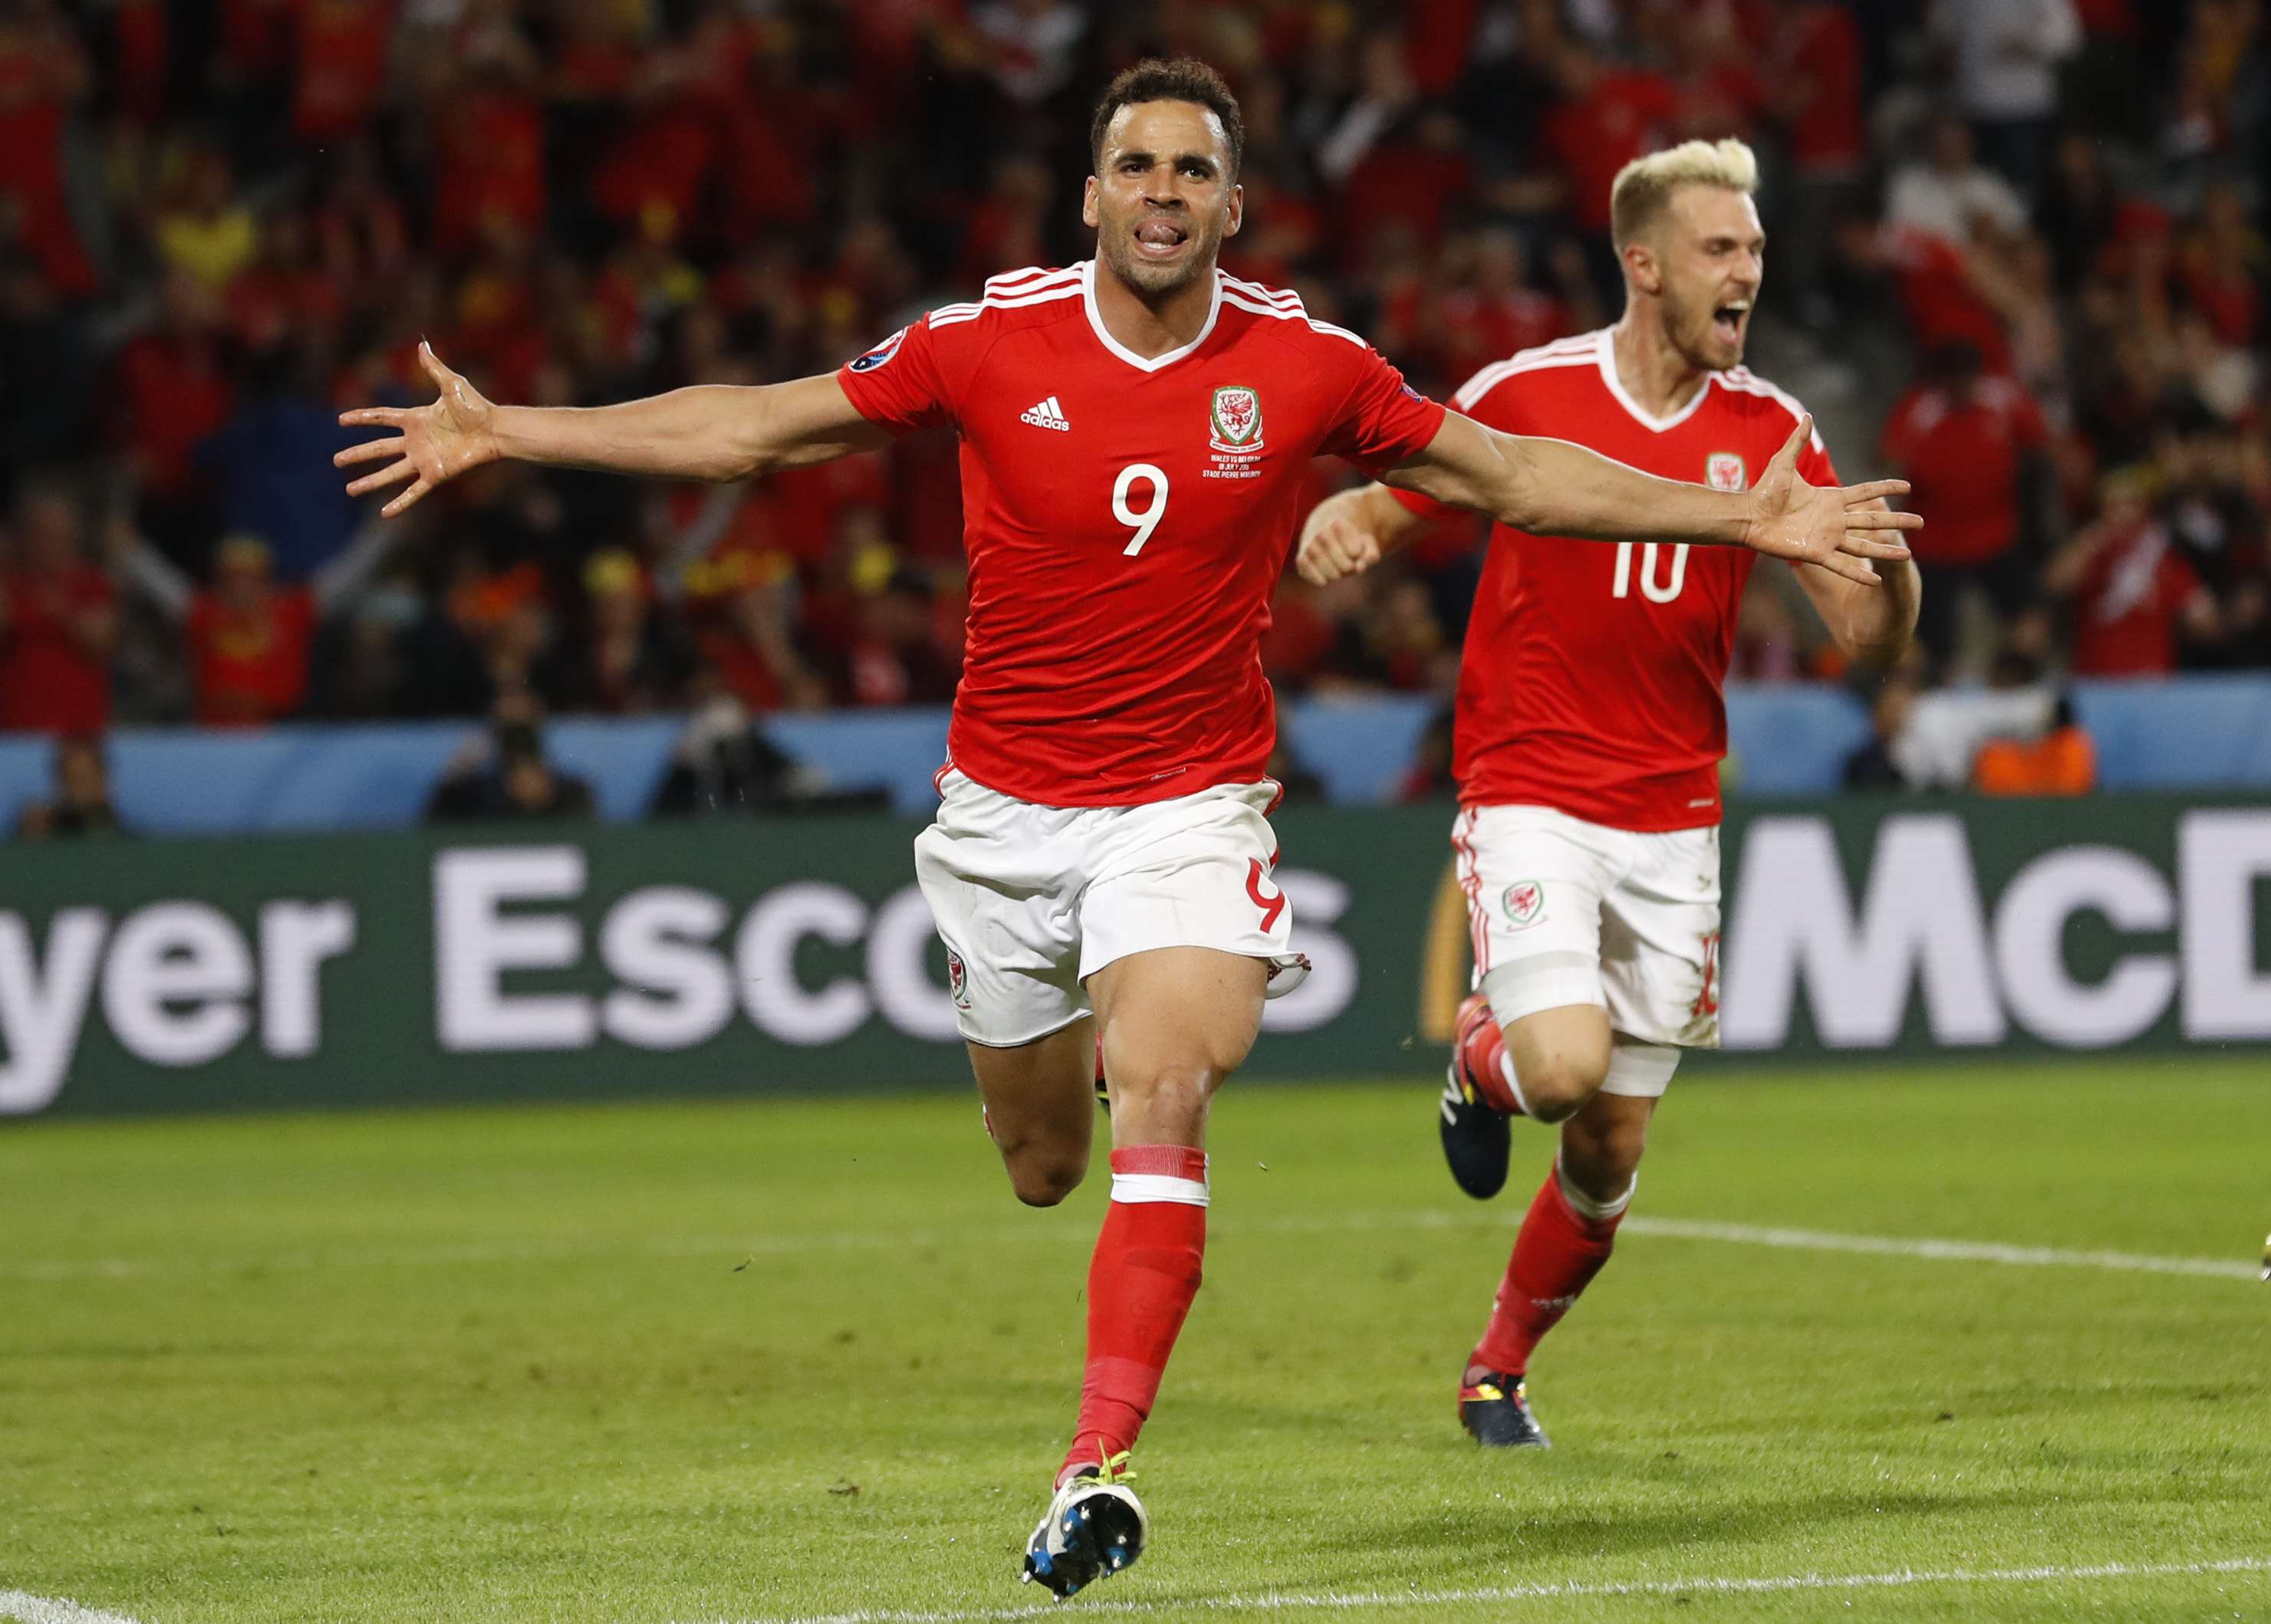 Wales Hal Robson-Kanu celebrates after scoring their second goal. Photo: Reuters